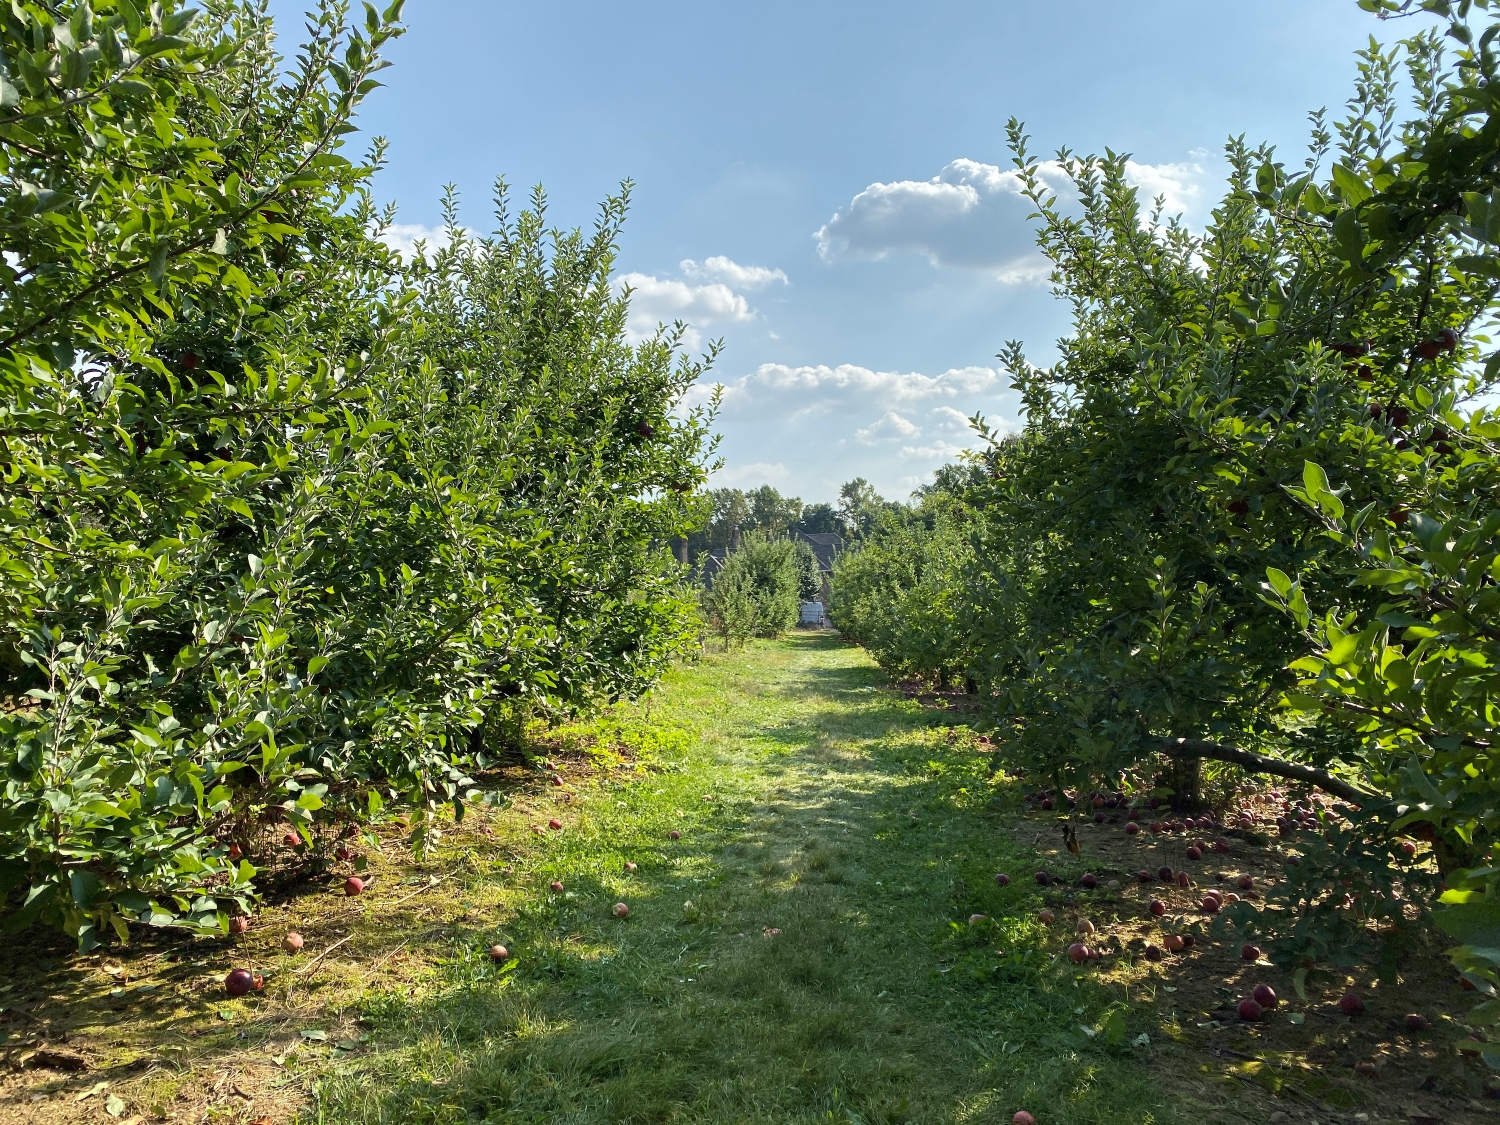 iphone 11 pro max ultra wide angle lens farm normal